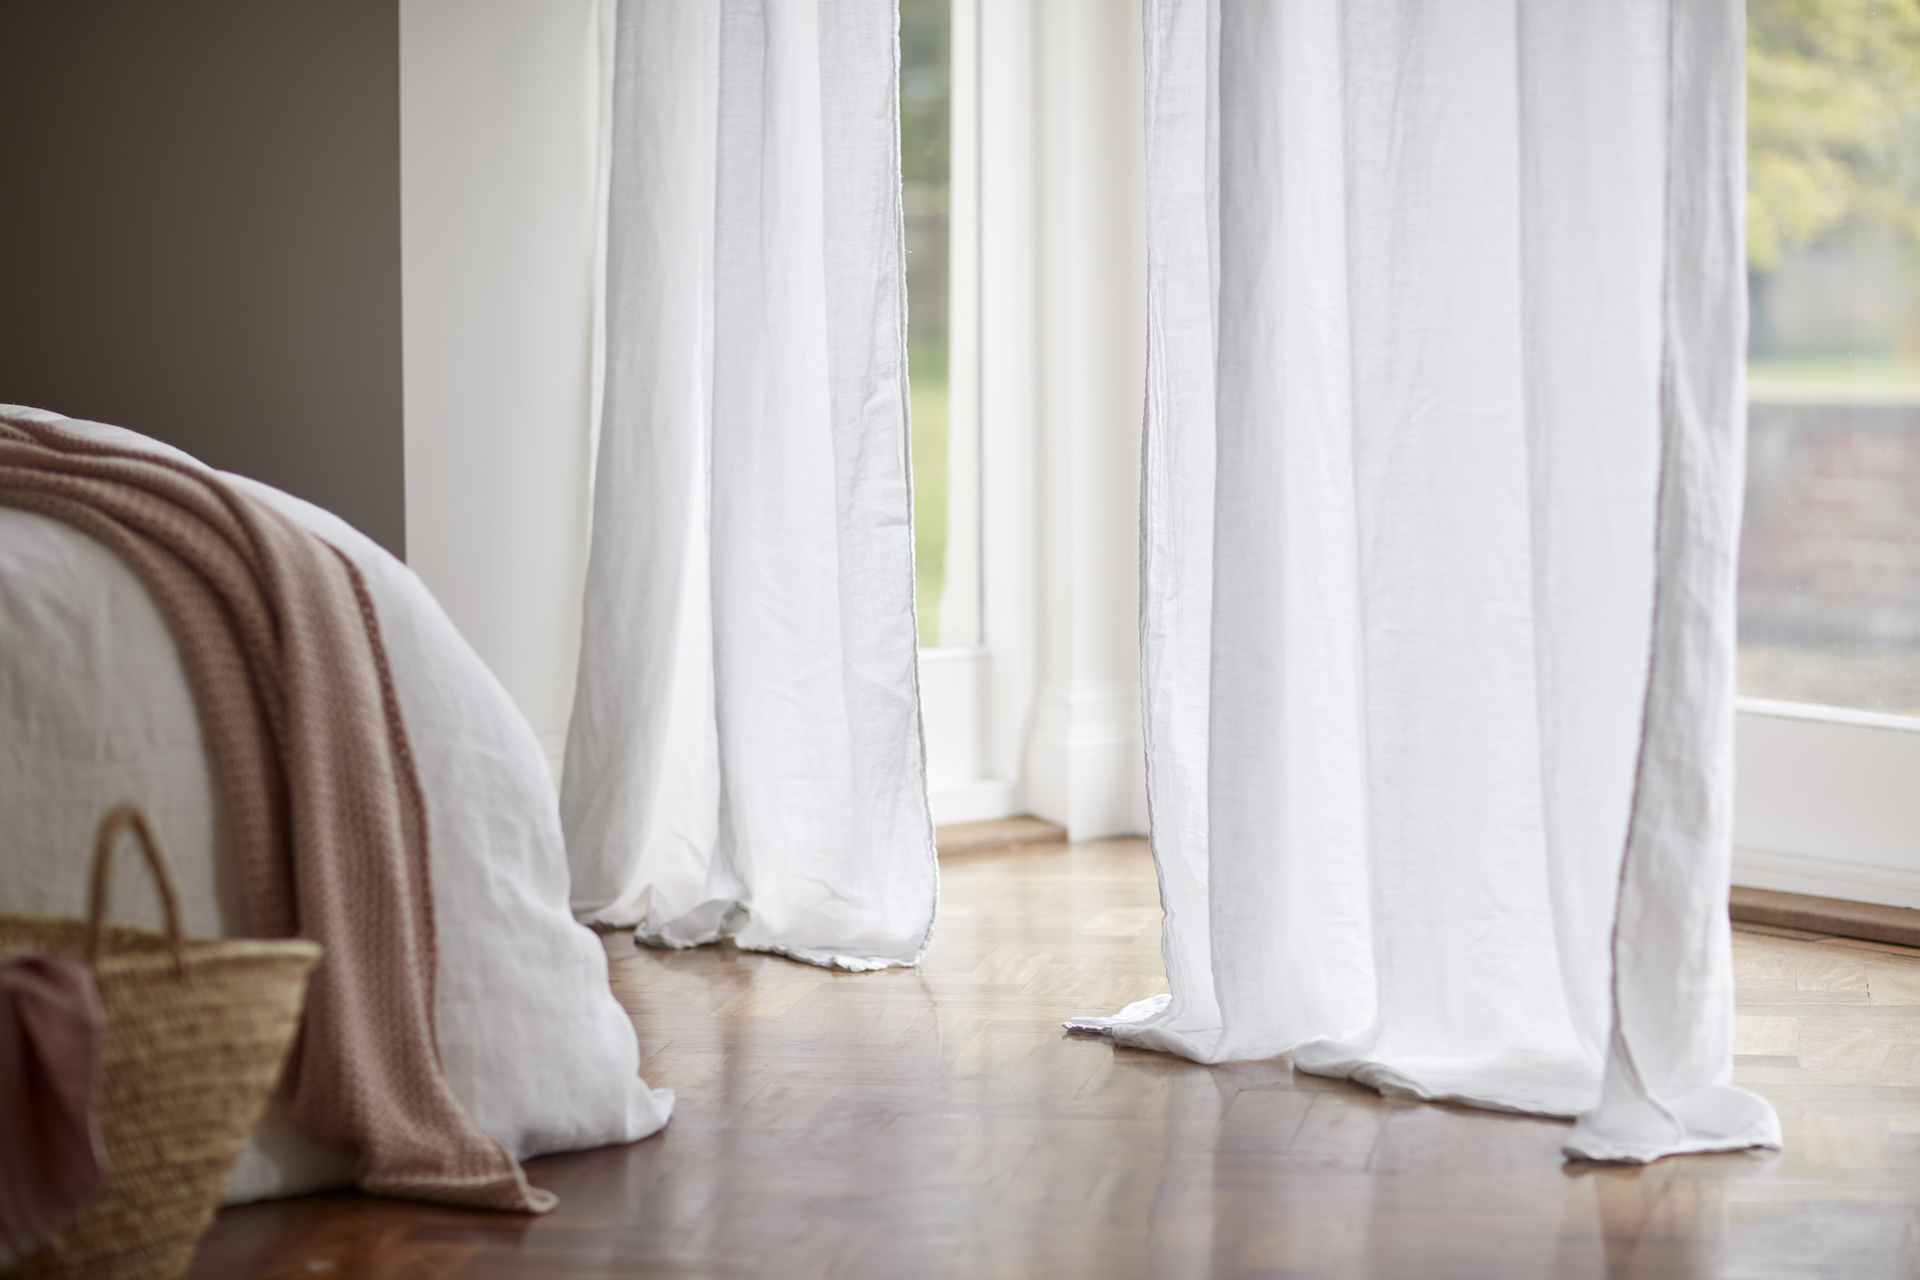 How to hang curtains without drilling – 5 fiendishly clever solutions for renters